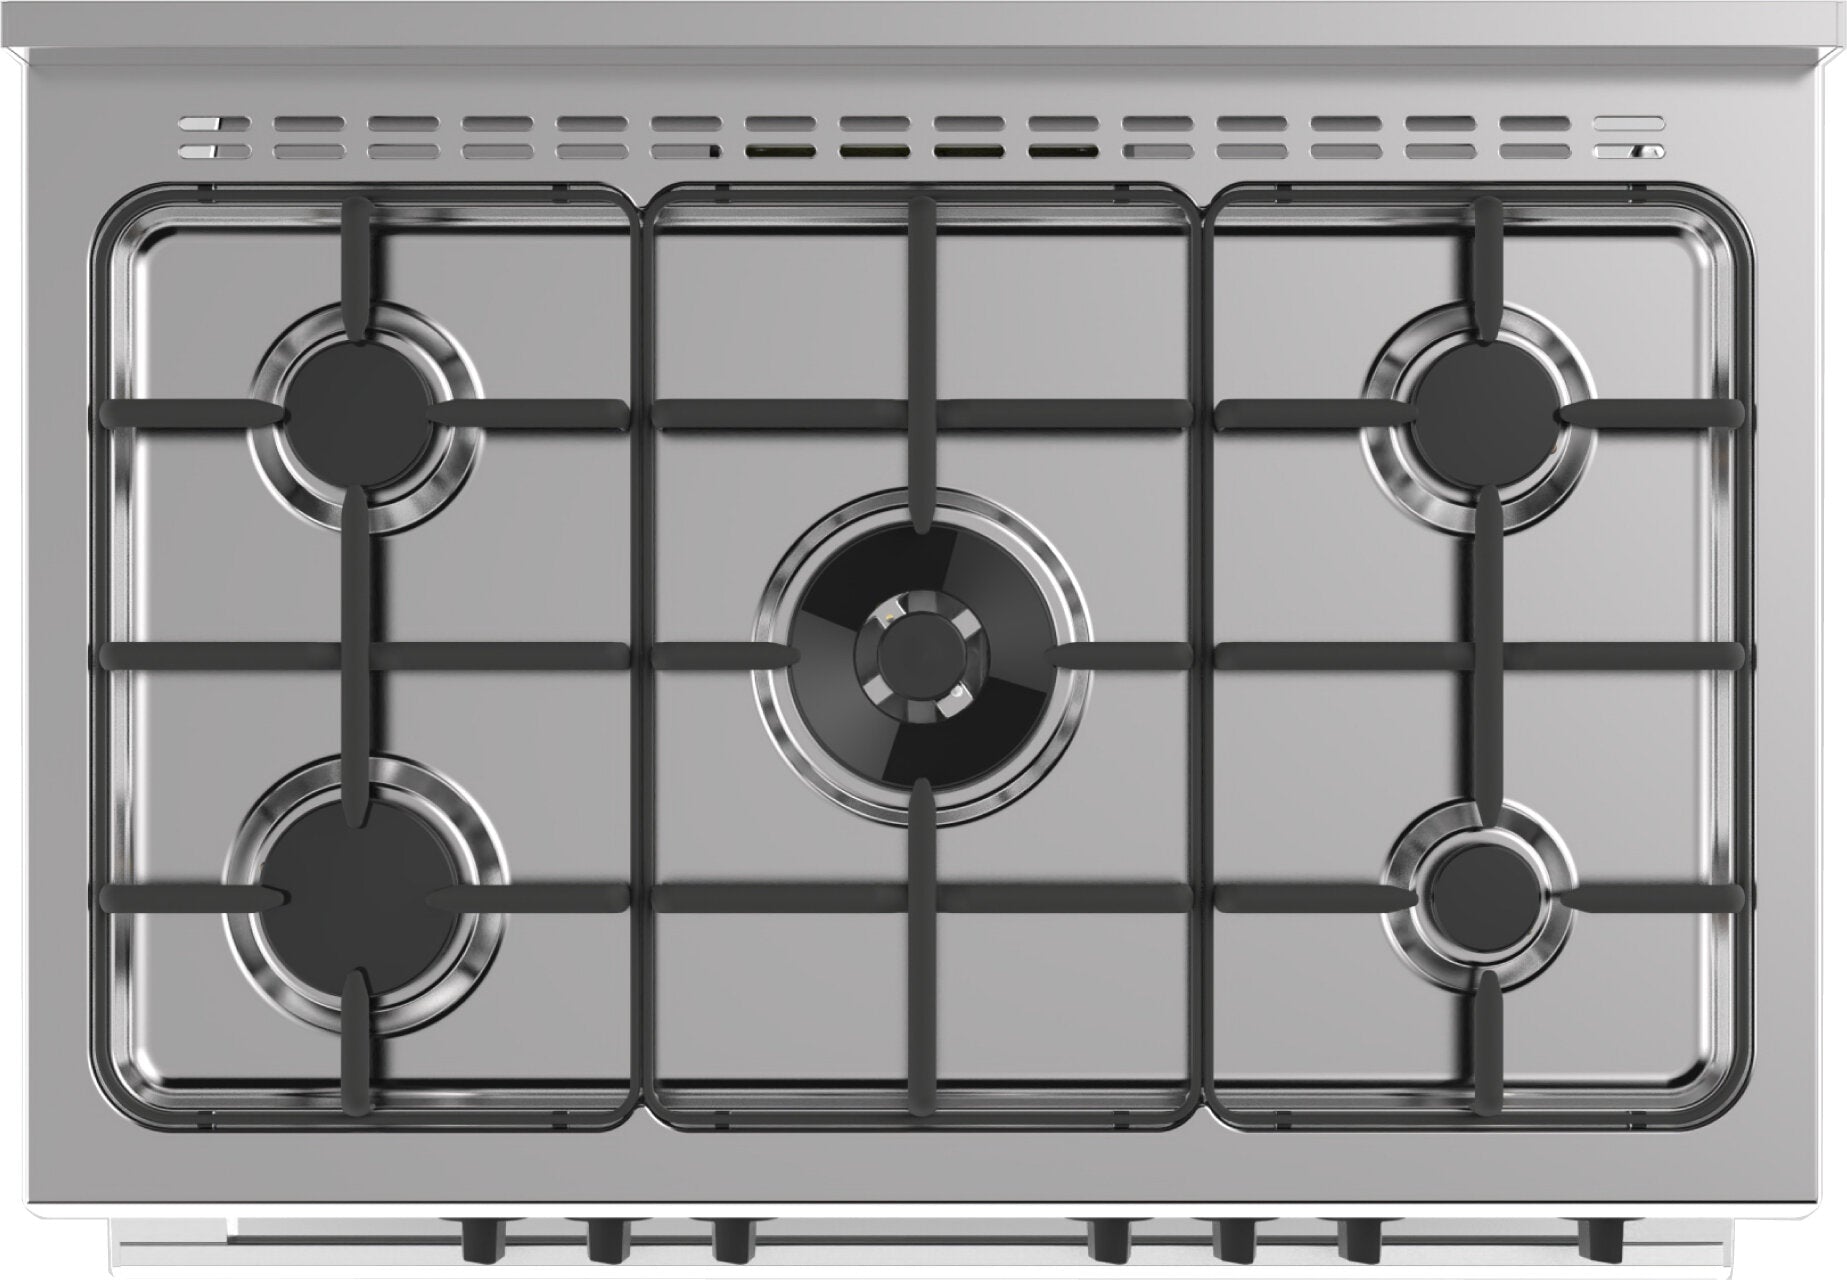 Glem 90cm Gas Oven & Cooktop NG/LPG Electric Grill Model GB965GG